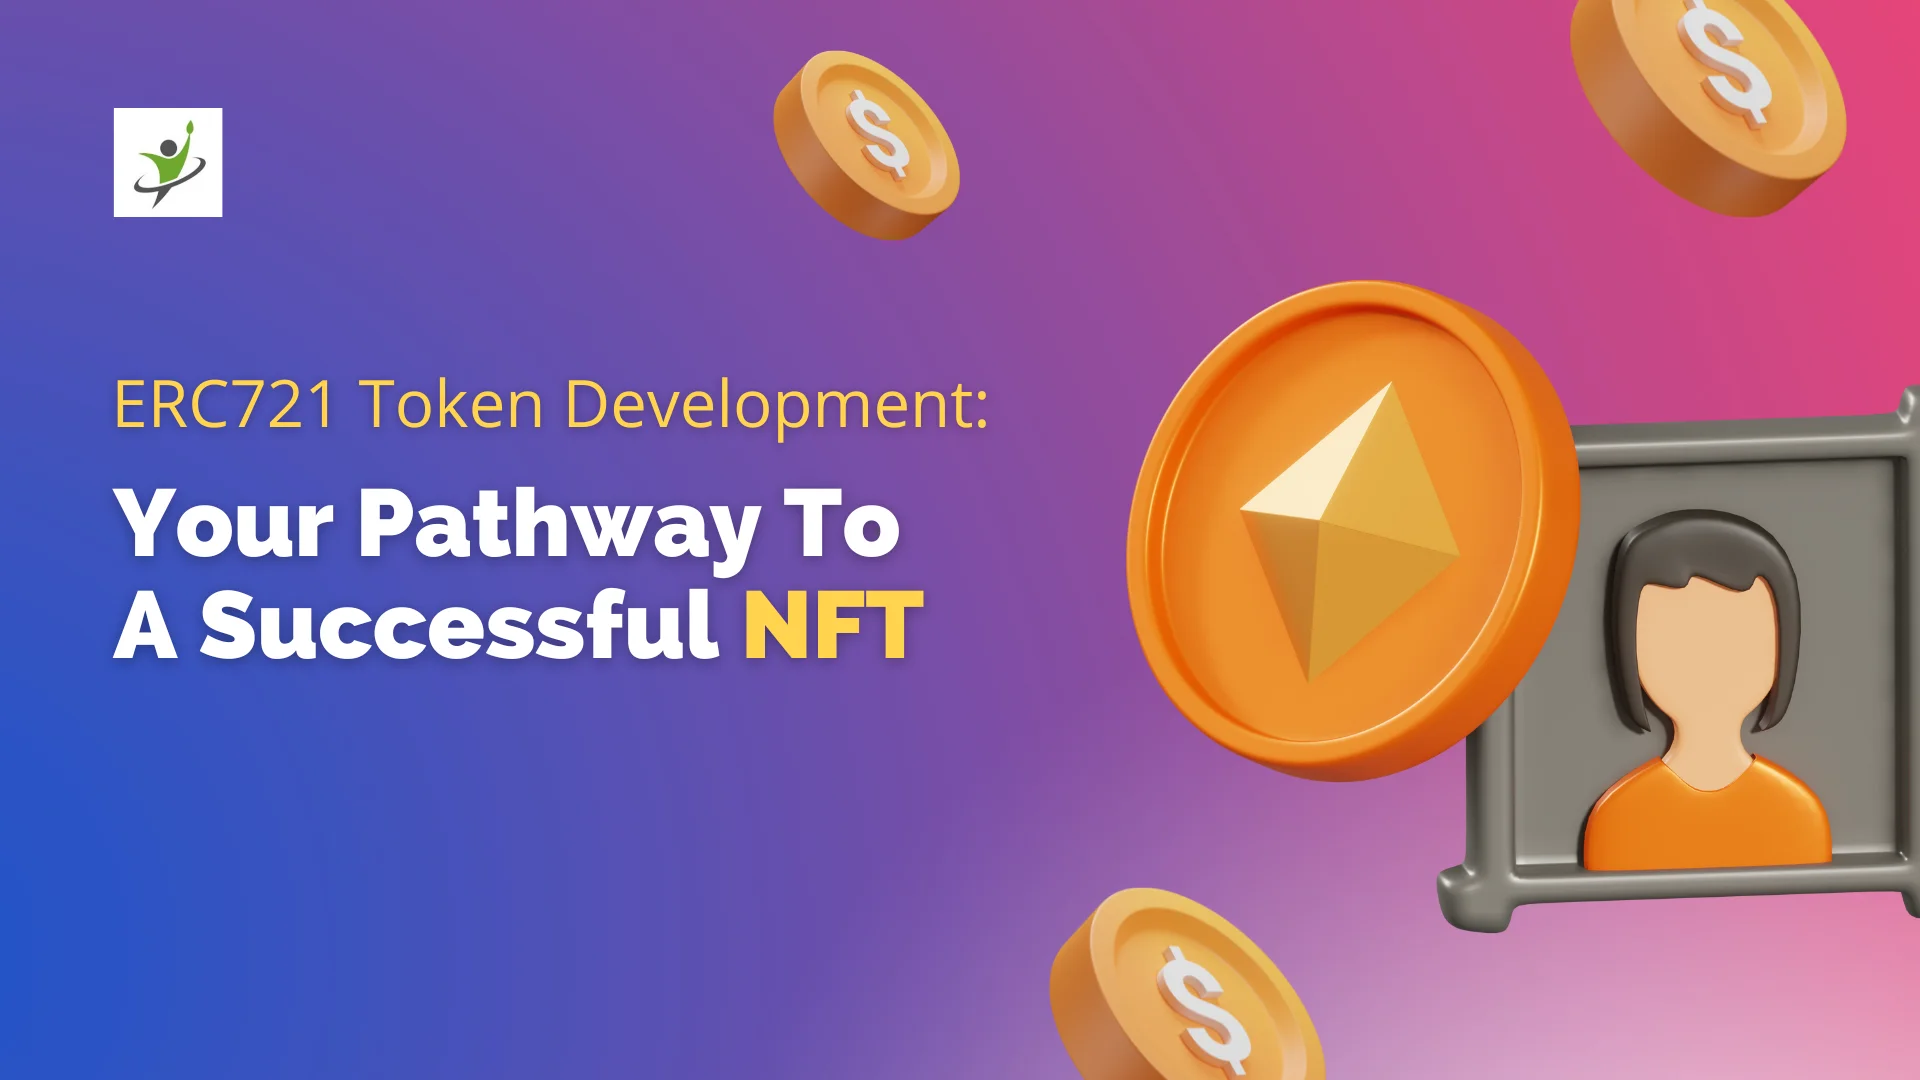 ERC721 Token Development: Your Pathway To A Successful NFT